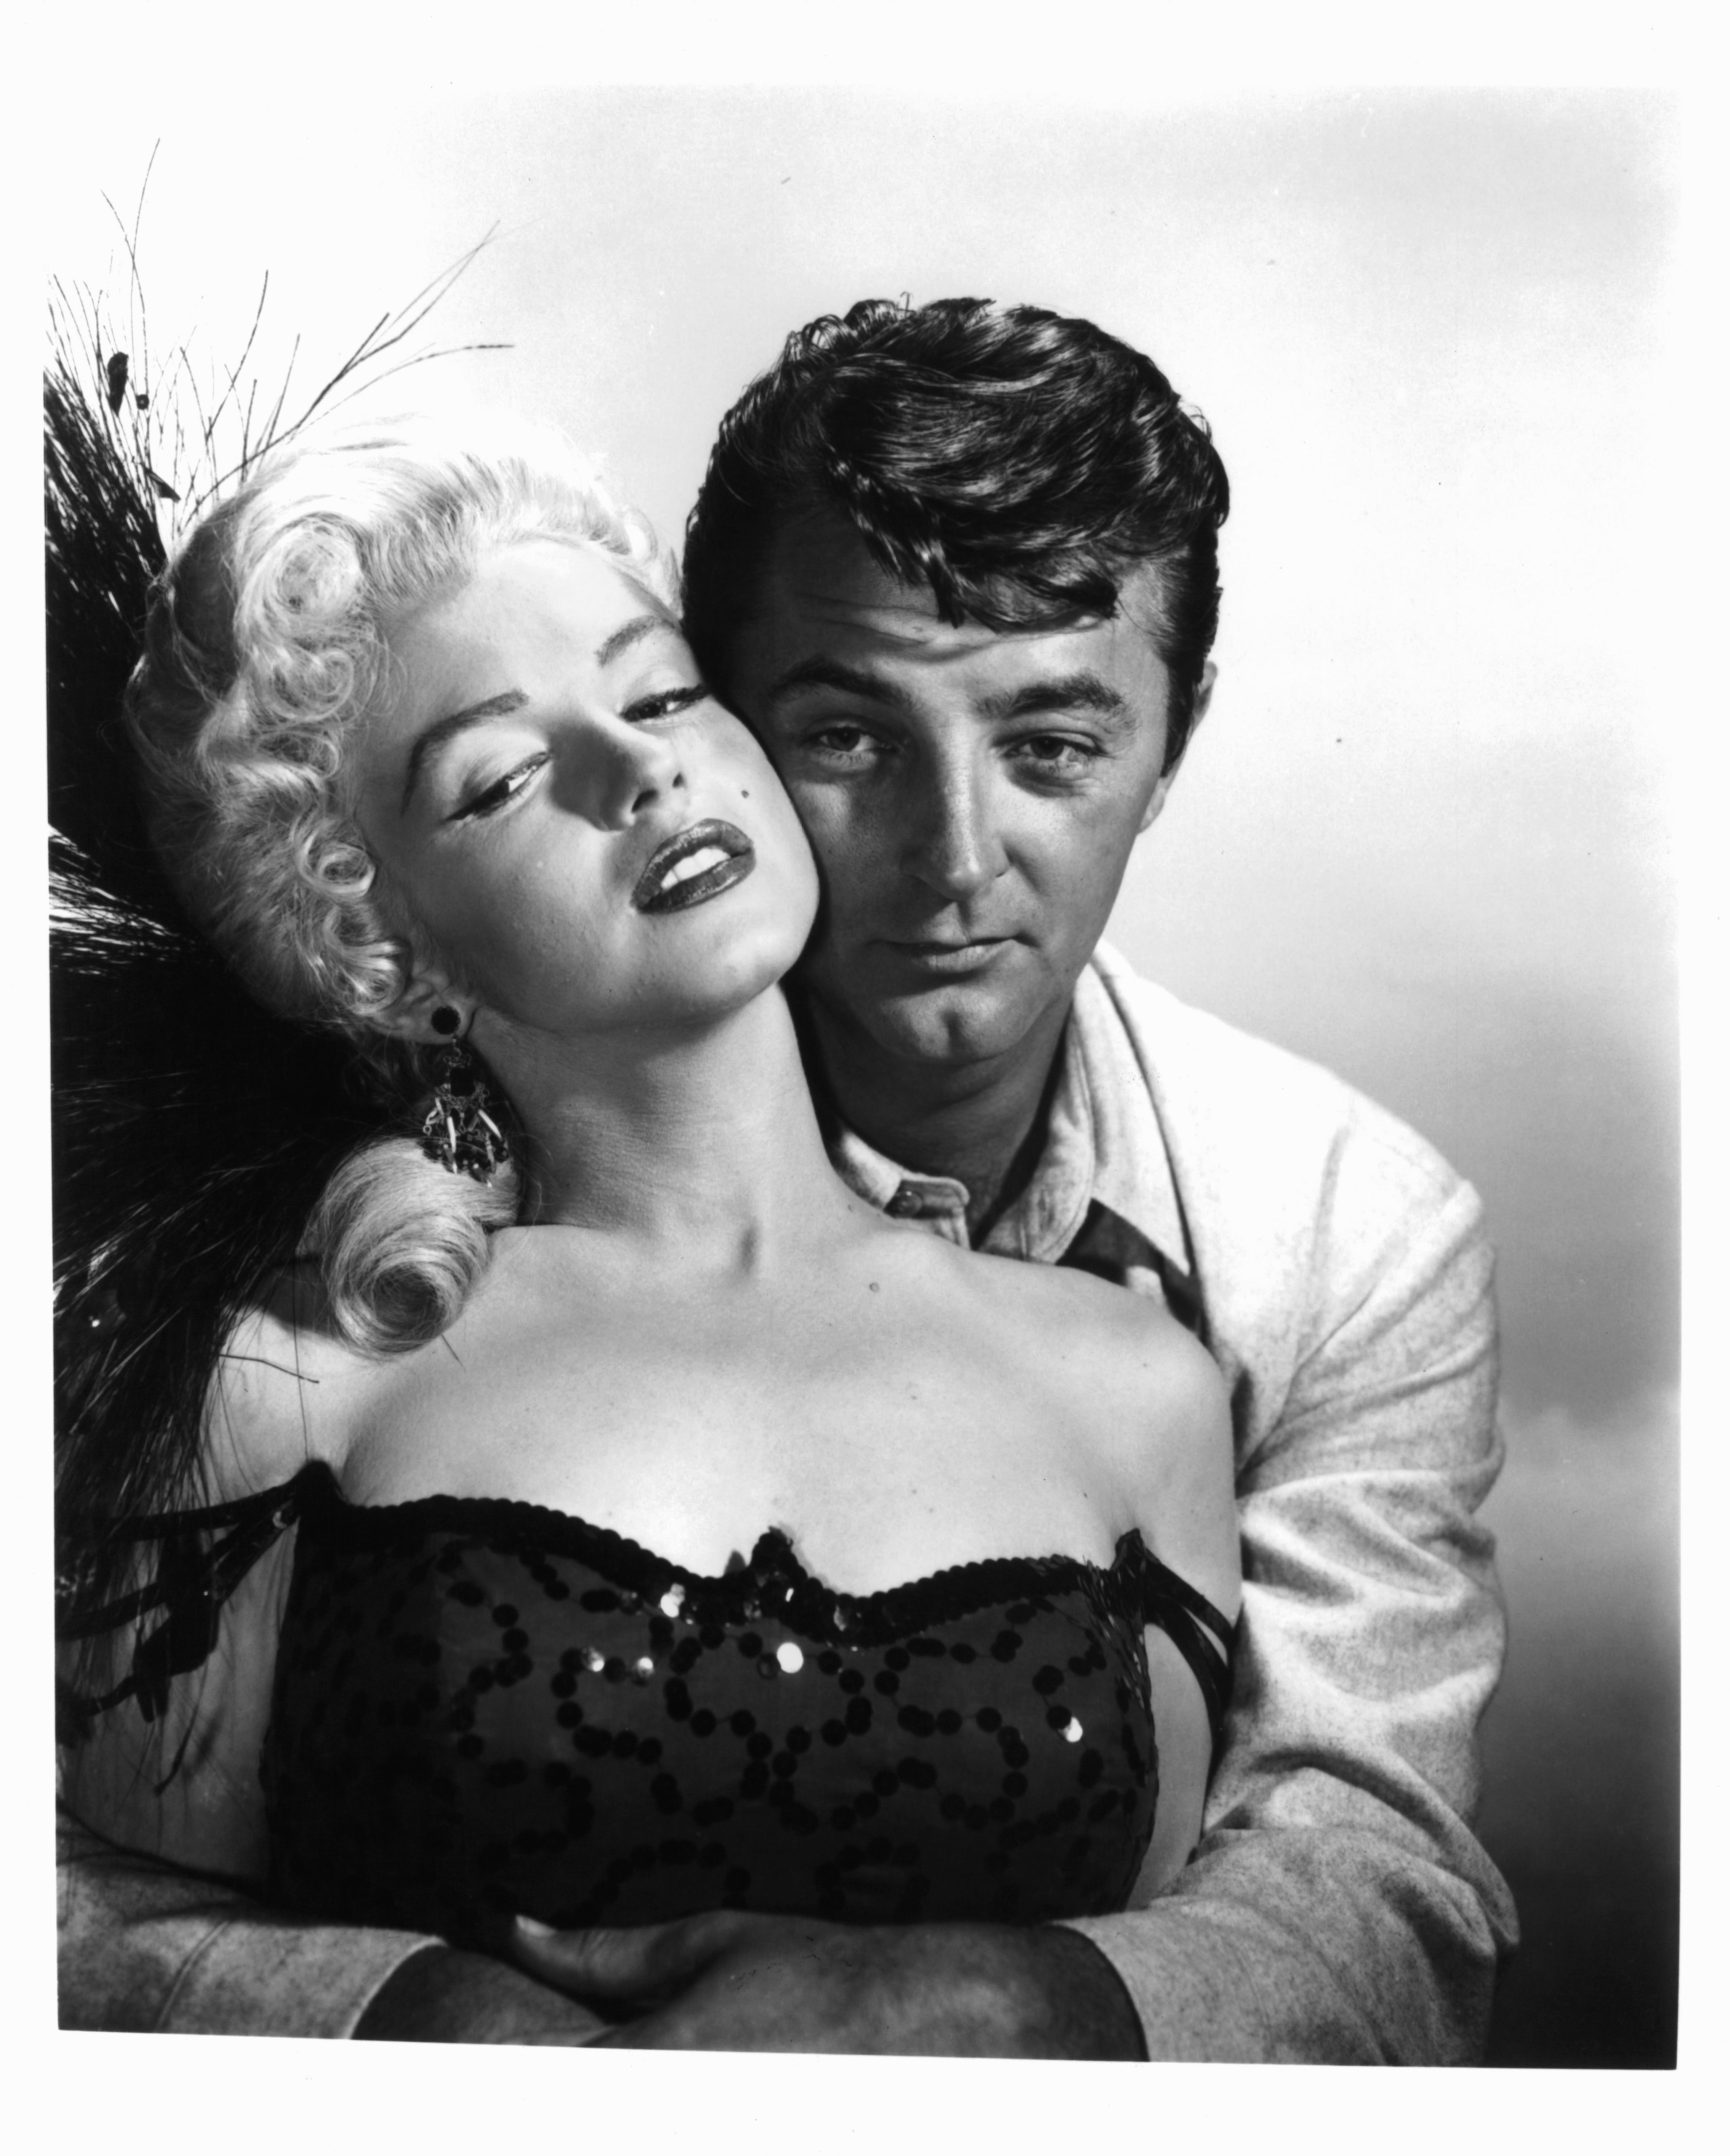 Still of Robert Mitchum and Marilyn Monroe in River of No Return (1954)